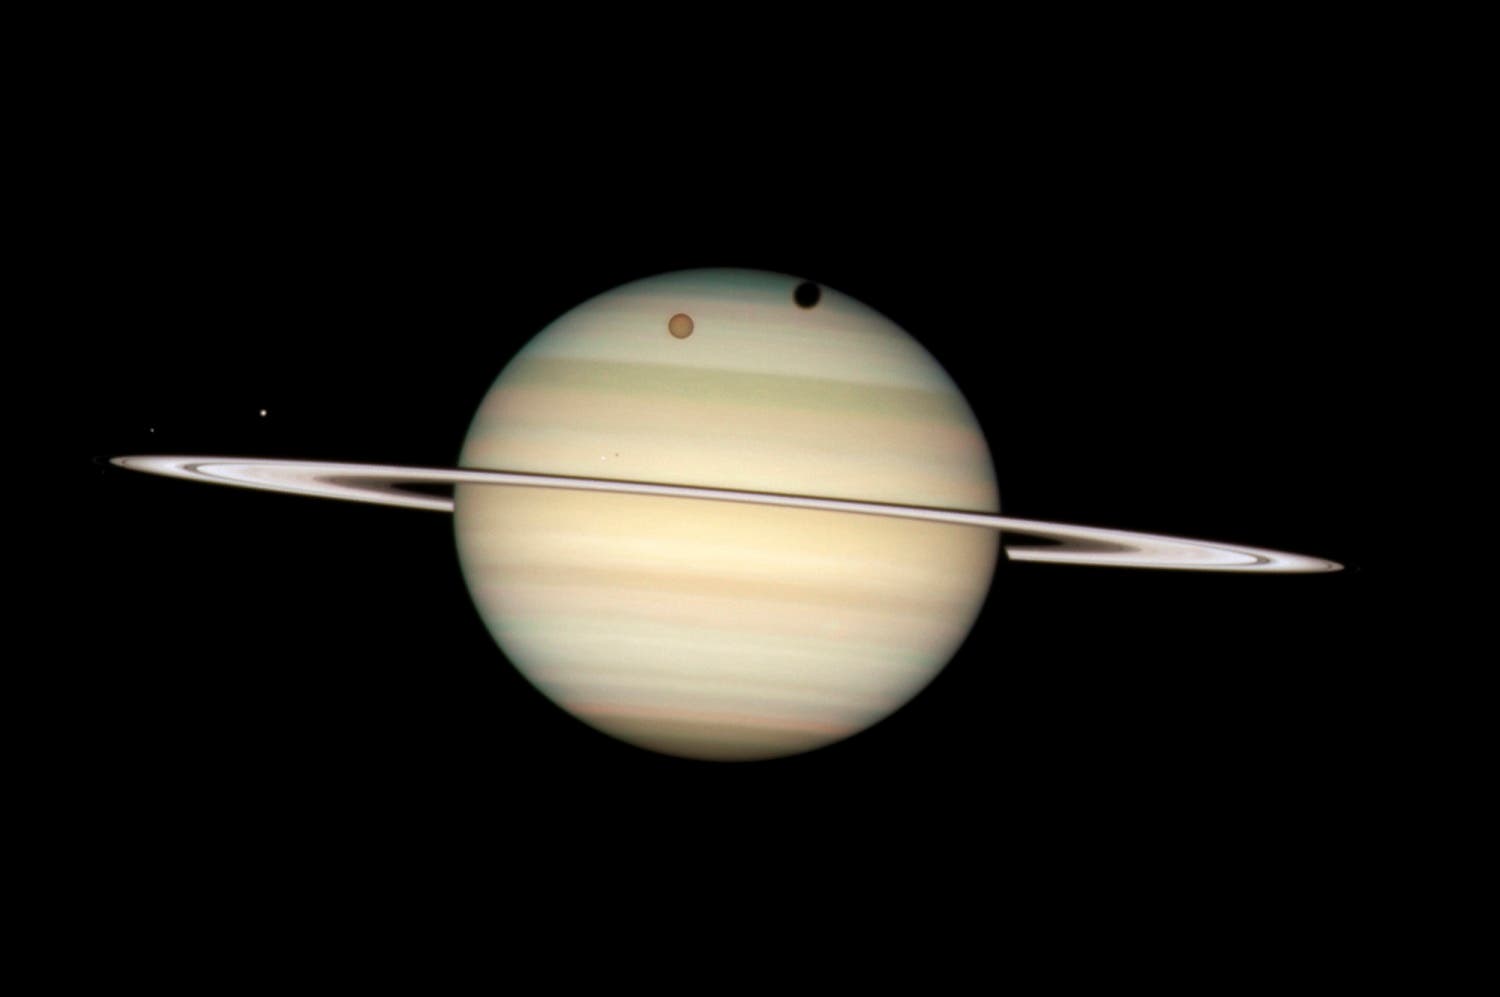 Moons of Saturn passing in front of their parent planet seen in this image taken by NASA's Hubble Space Telescope. (File photo: Reuters)